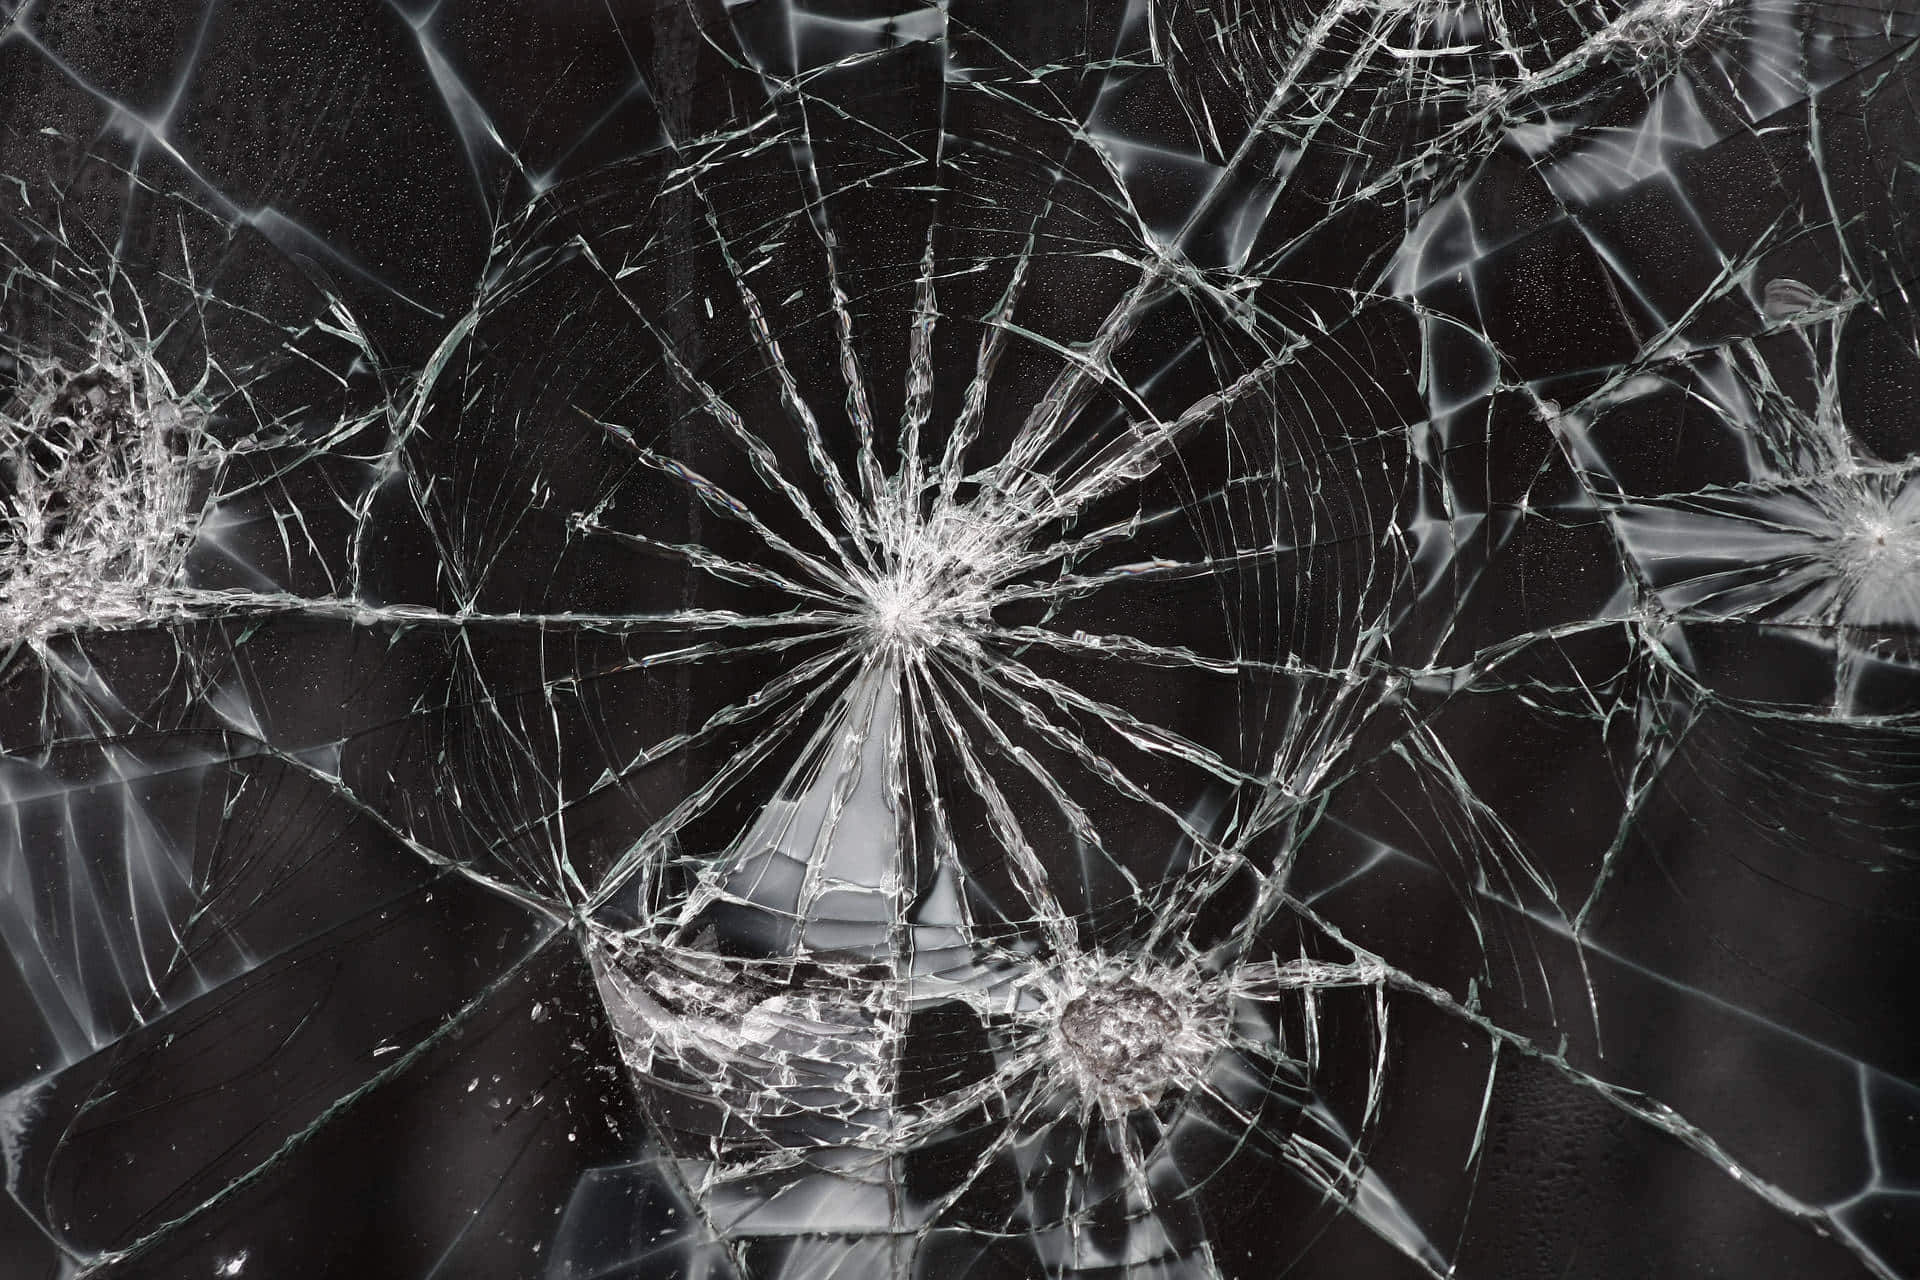 Intricate Patterns of Shattered Glass